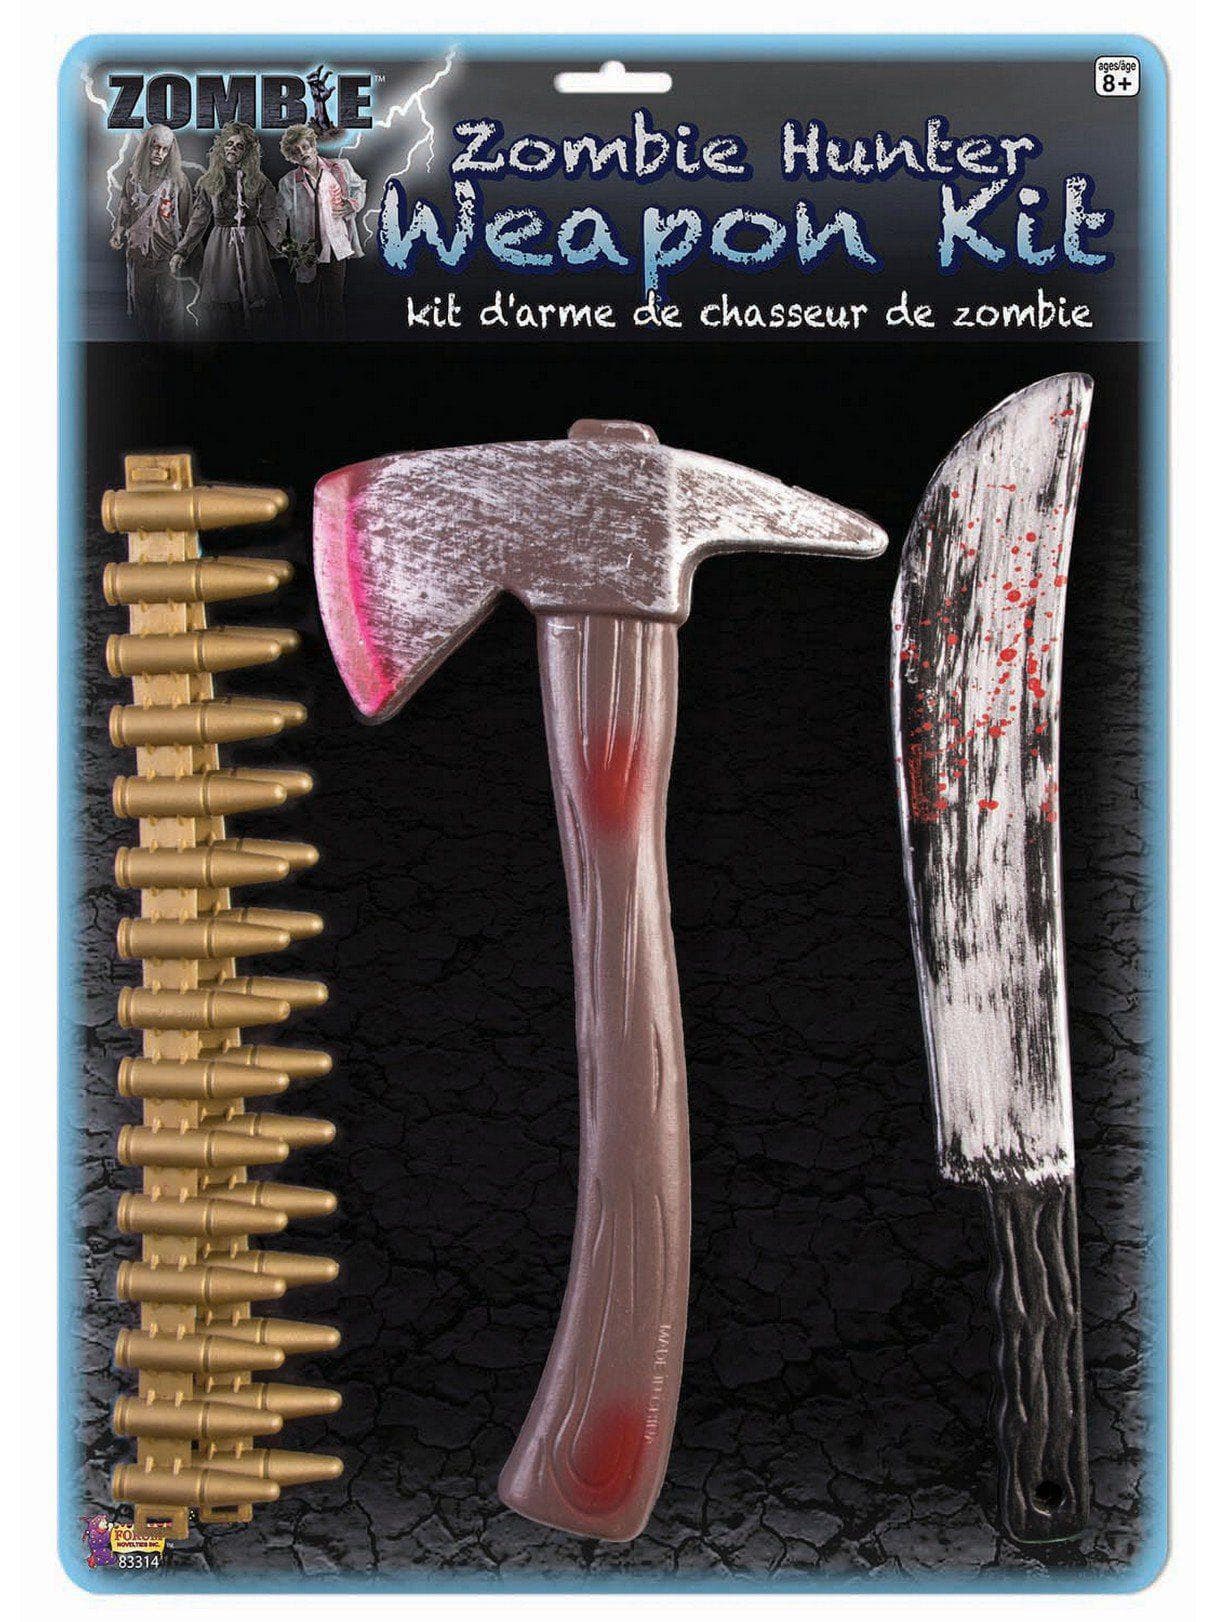 Weapon Kit for Zombie Hunter - costumes.com